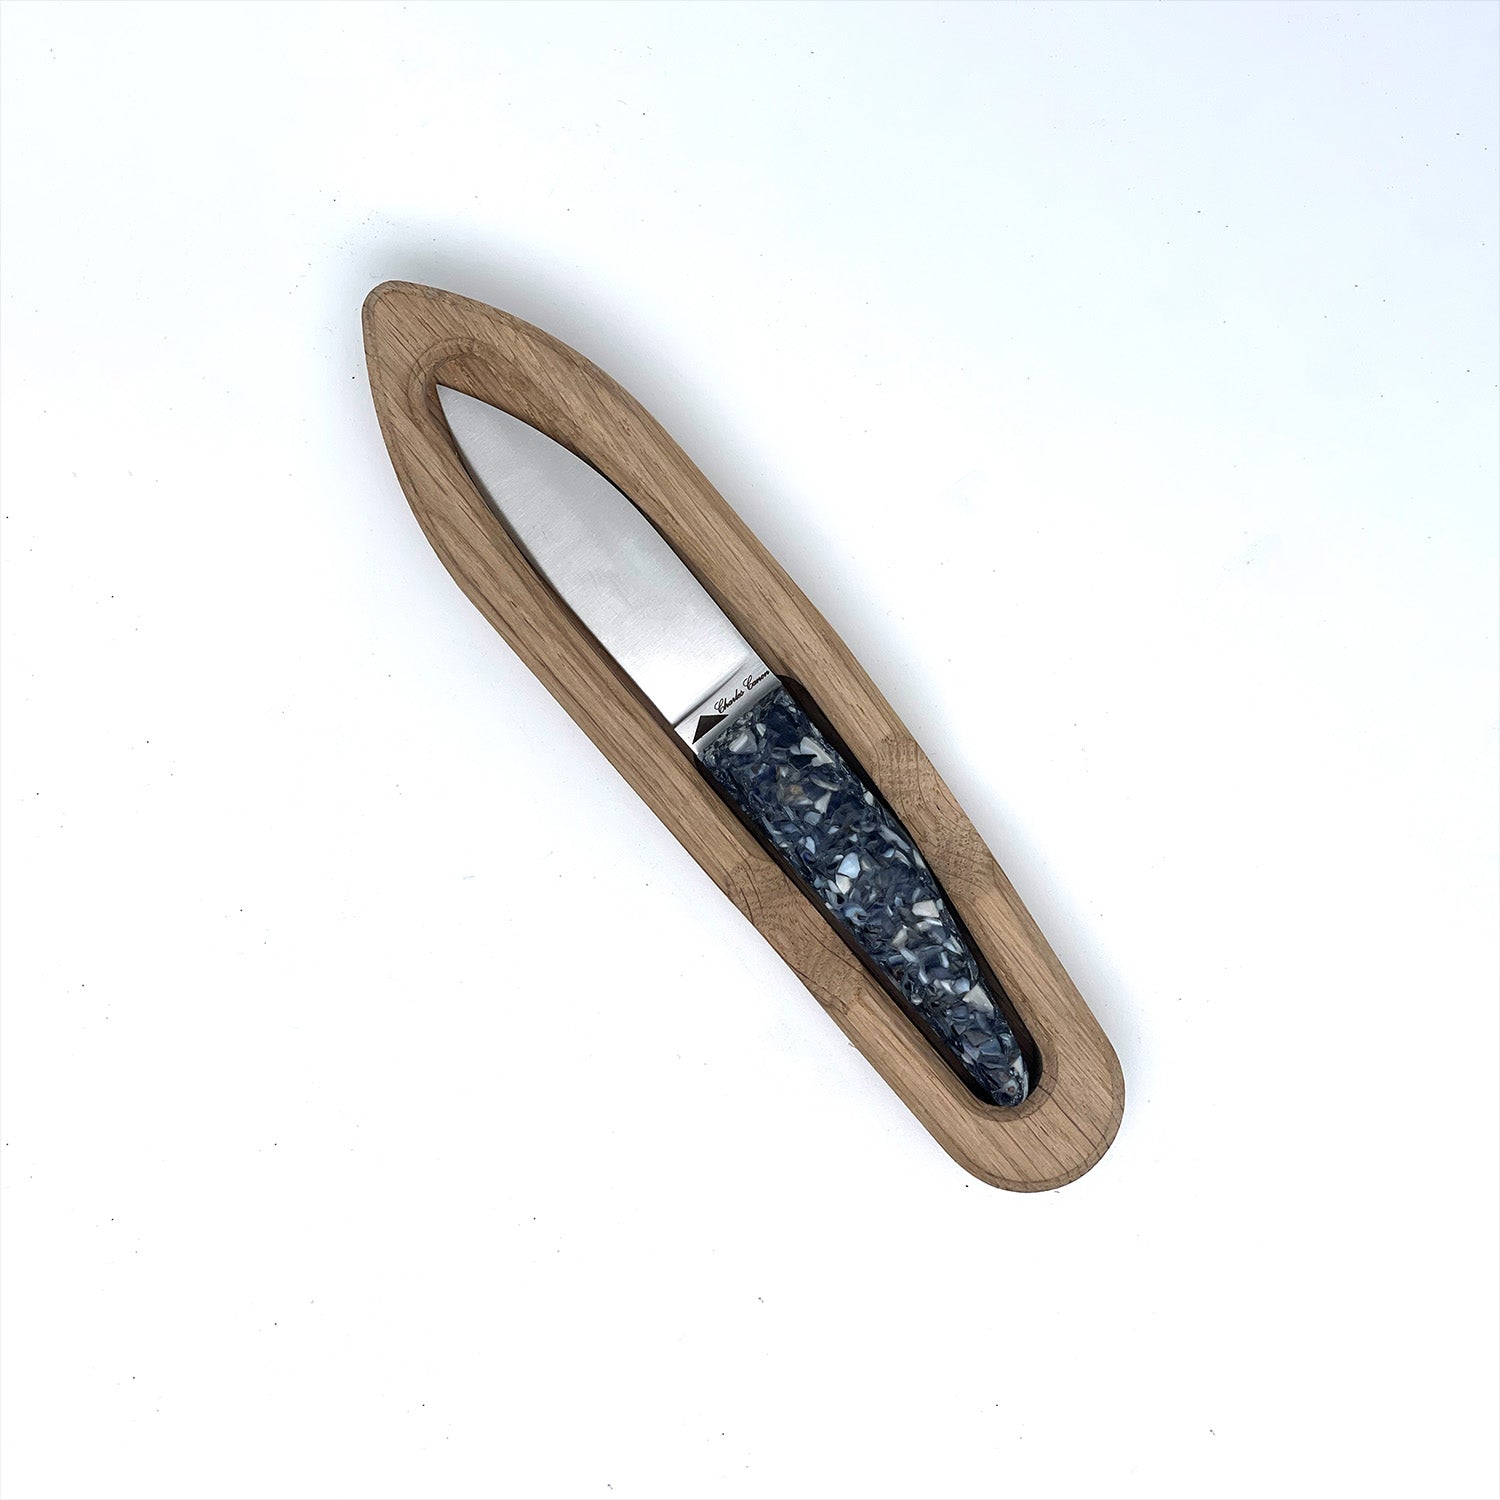 Small cutter with a handle made from recycled mussel shells